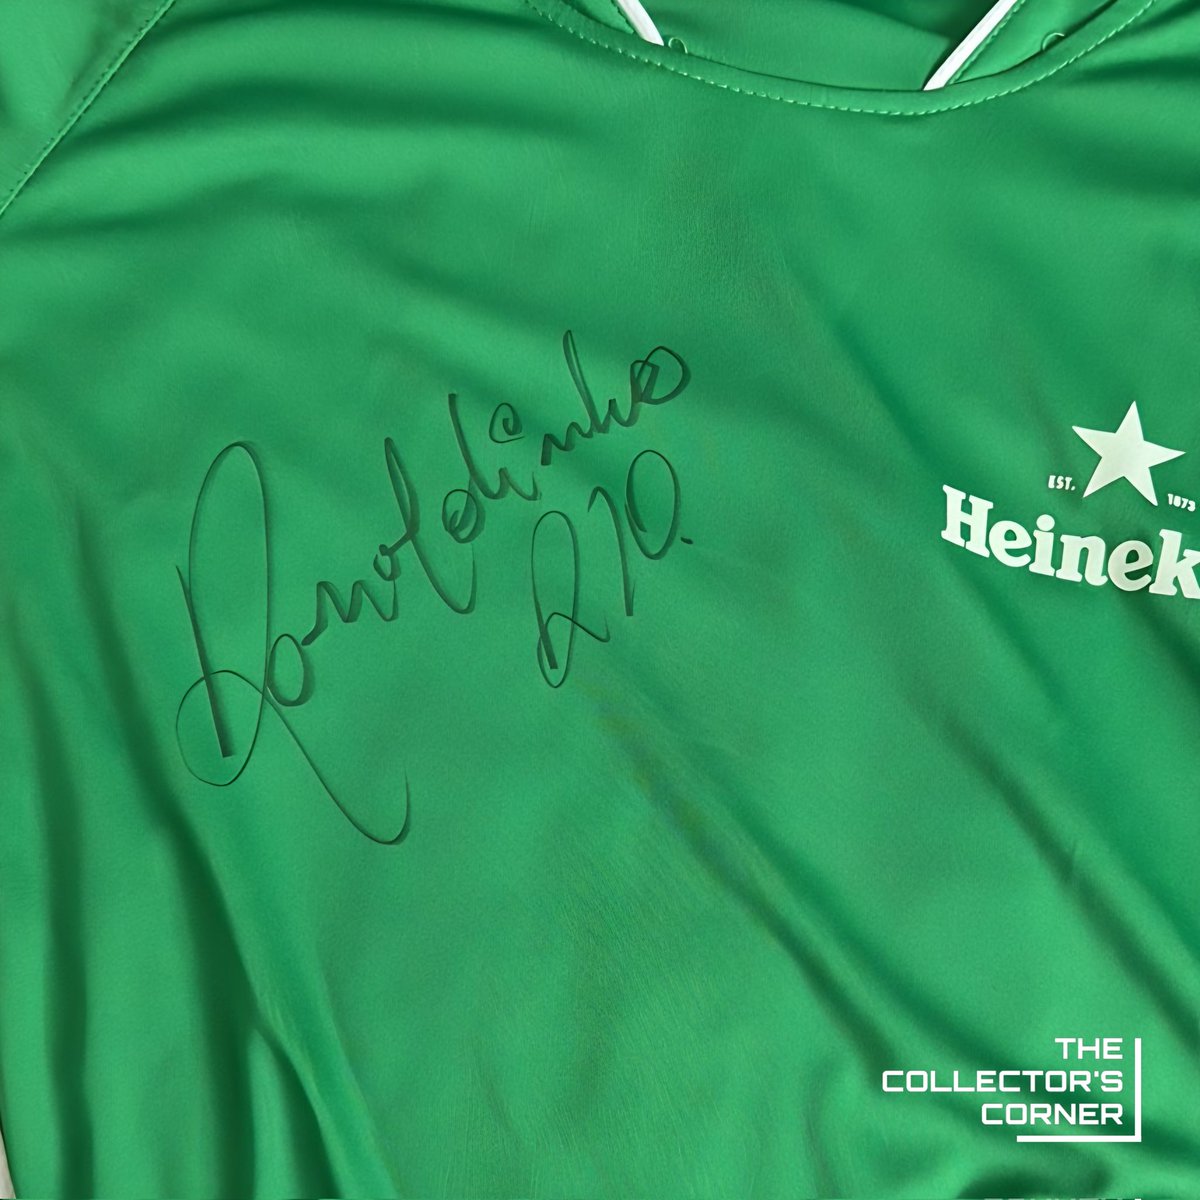 Guess the Autograph! 

Can you guess the who signed this shirt?...Hint: At 13, he scored 23 goals in one game during a match in his local youth League! 😵‍💫

Guess correctly for a 10% off voucher

thecollectorscorner.co.uk

#guess #signedmemorabilia #icon #footballshirt